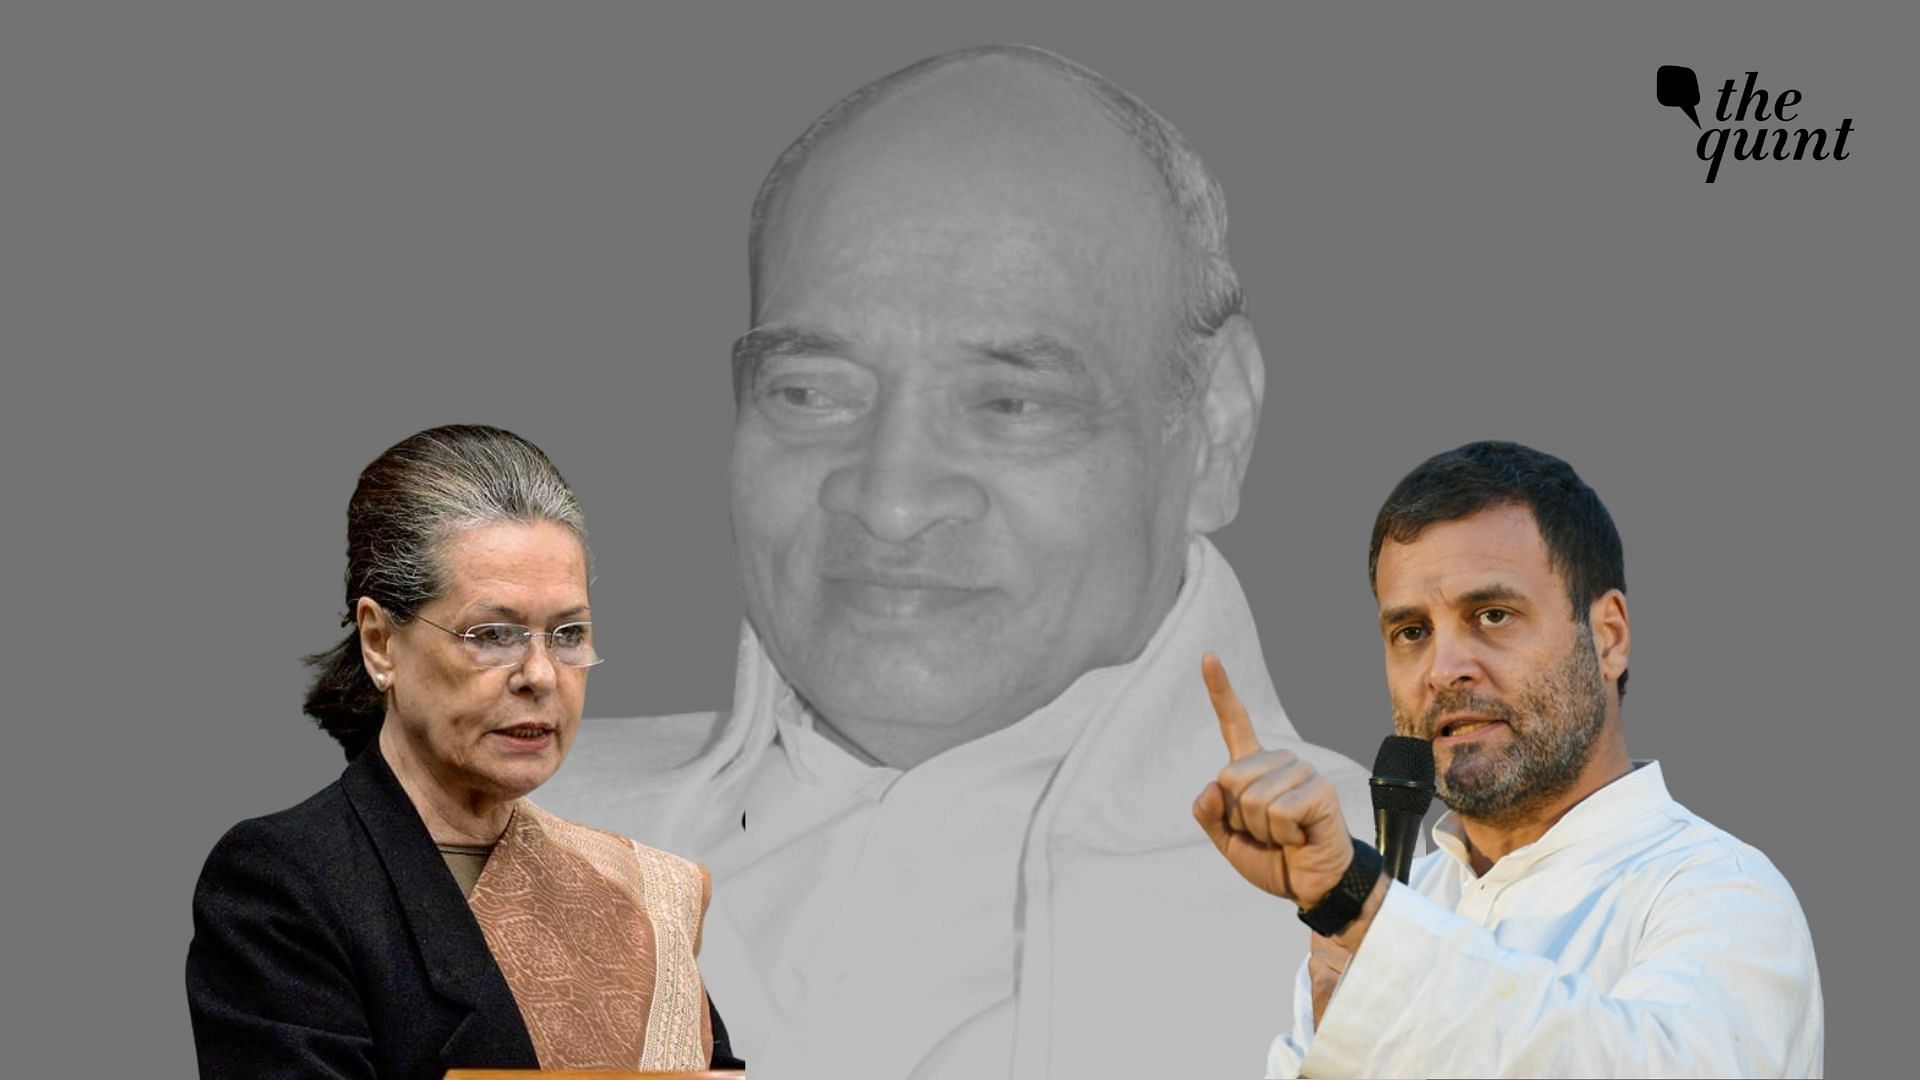 Congress Interim President Sonia Gandhi and her son Rahul Gandhi on Friday, 24 July paid tributes to late former Prime Minister PV Narasimha Rao in what is seen as a rare move by Gandhis.